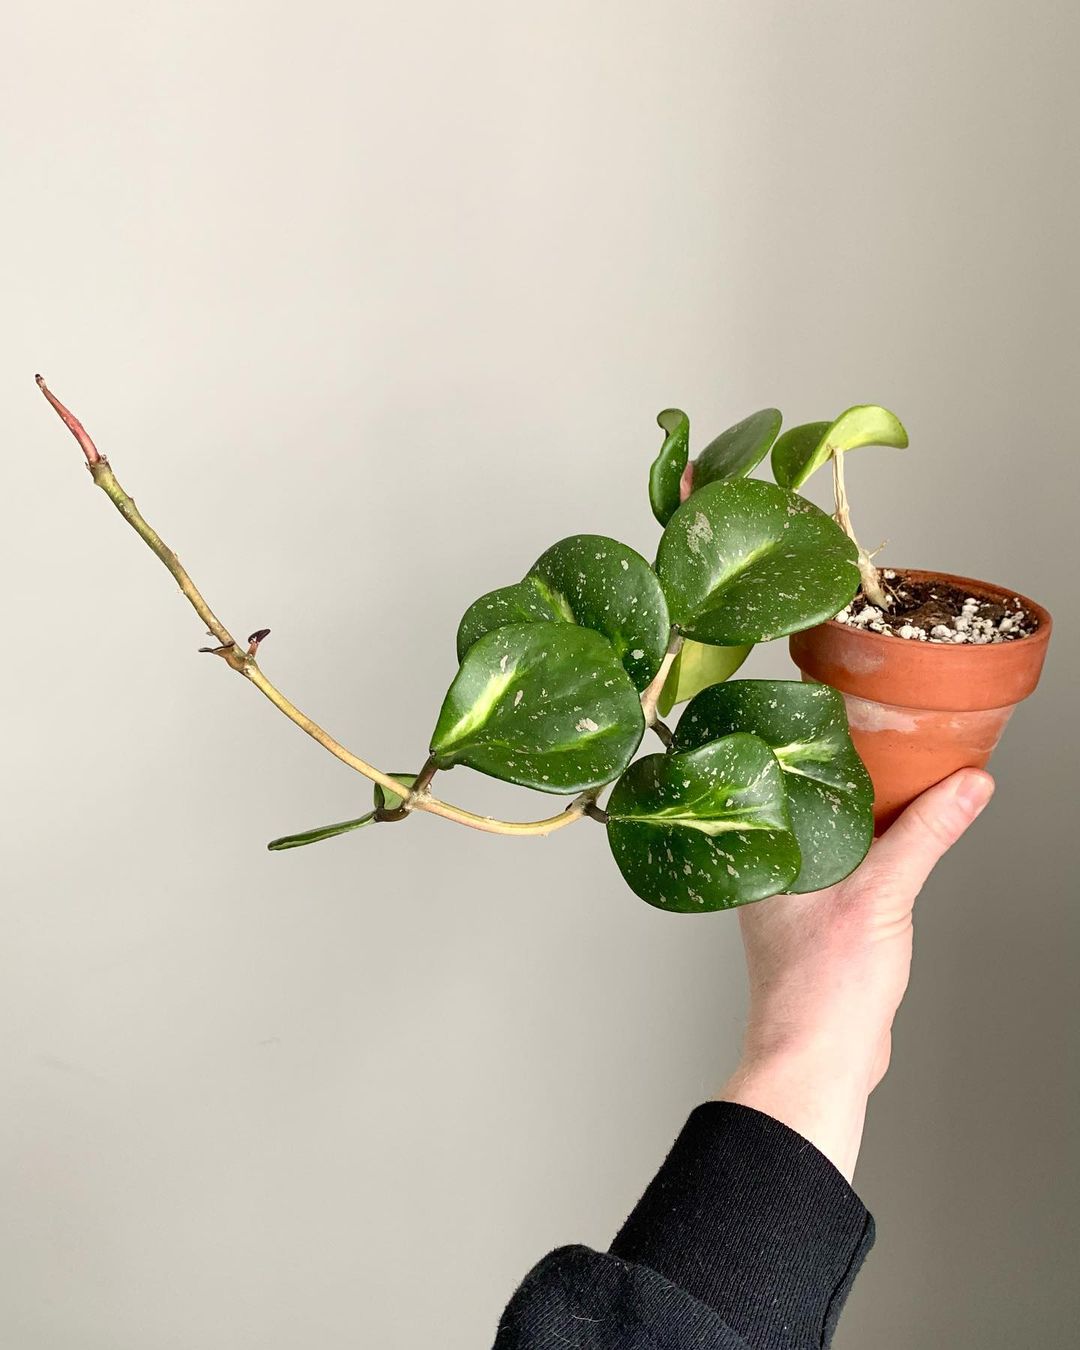 Small potted Hoya plant being cared for by person, fertilizing.